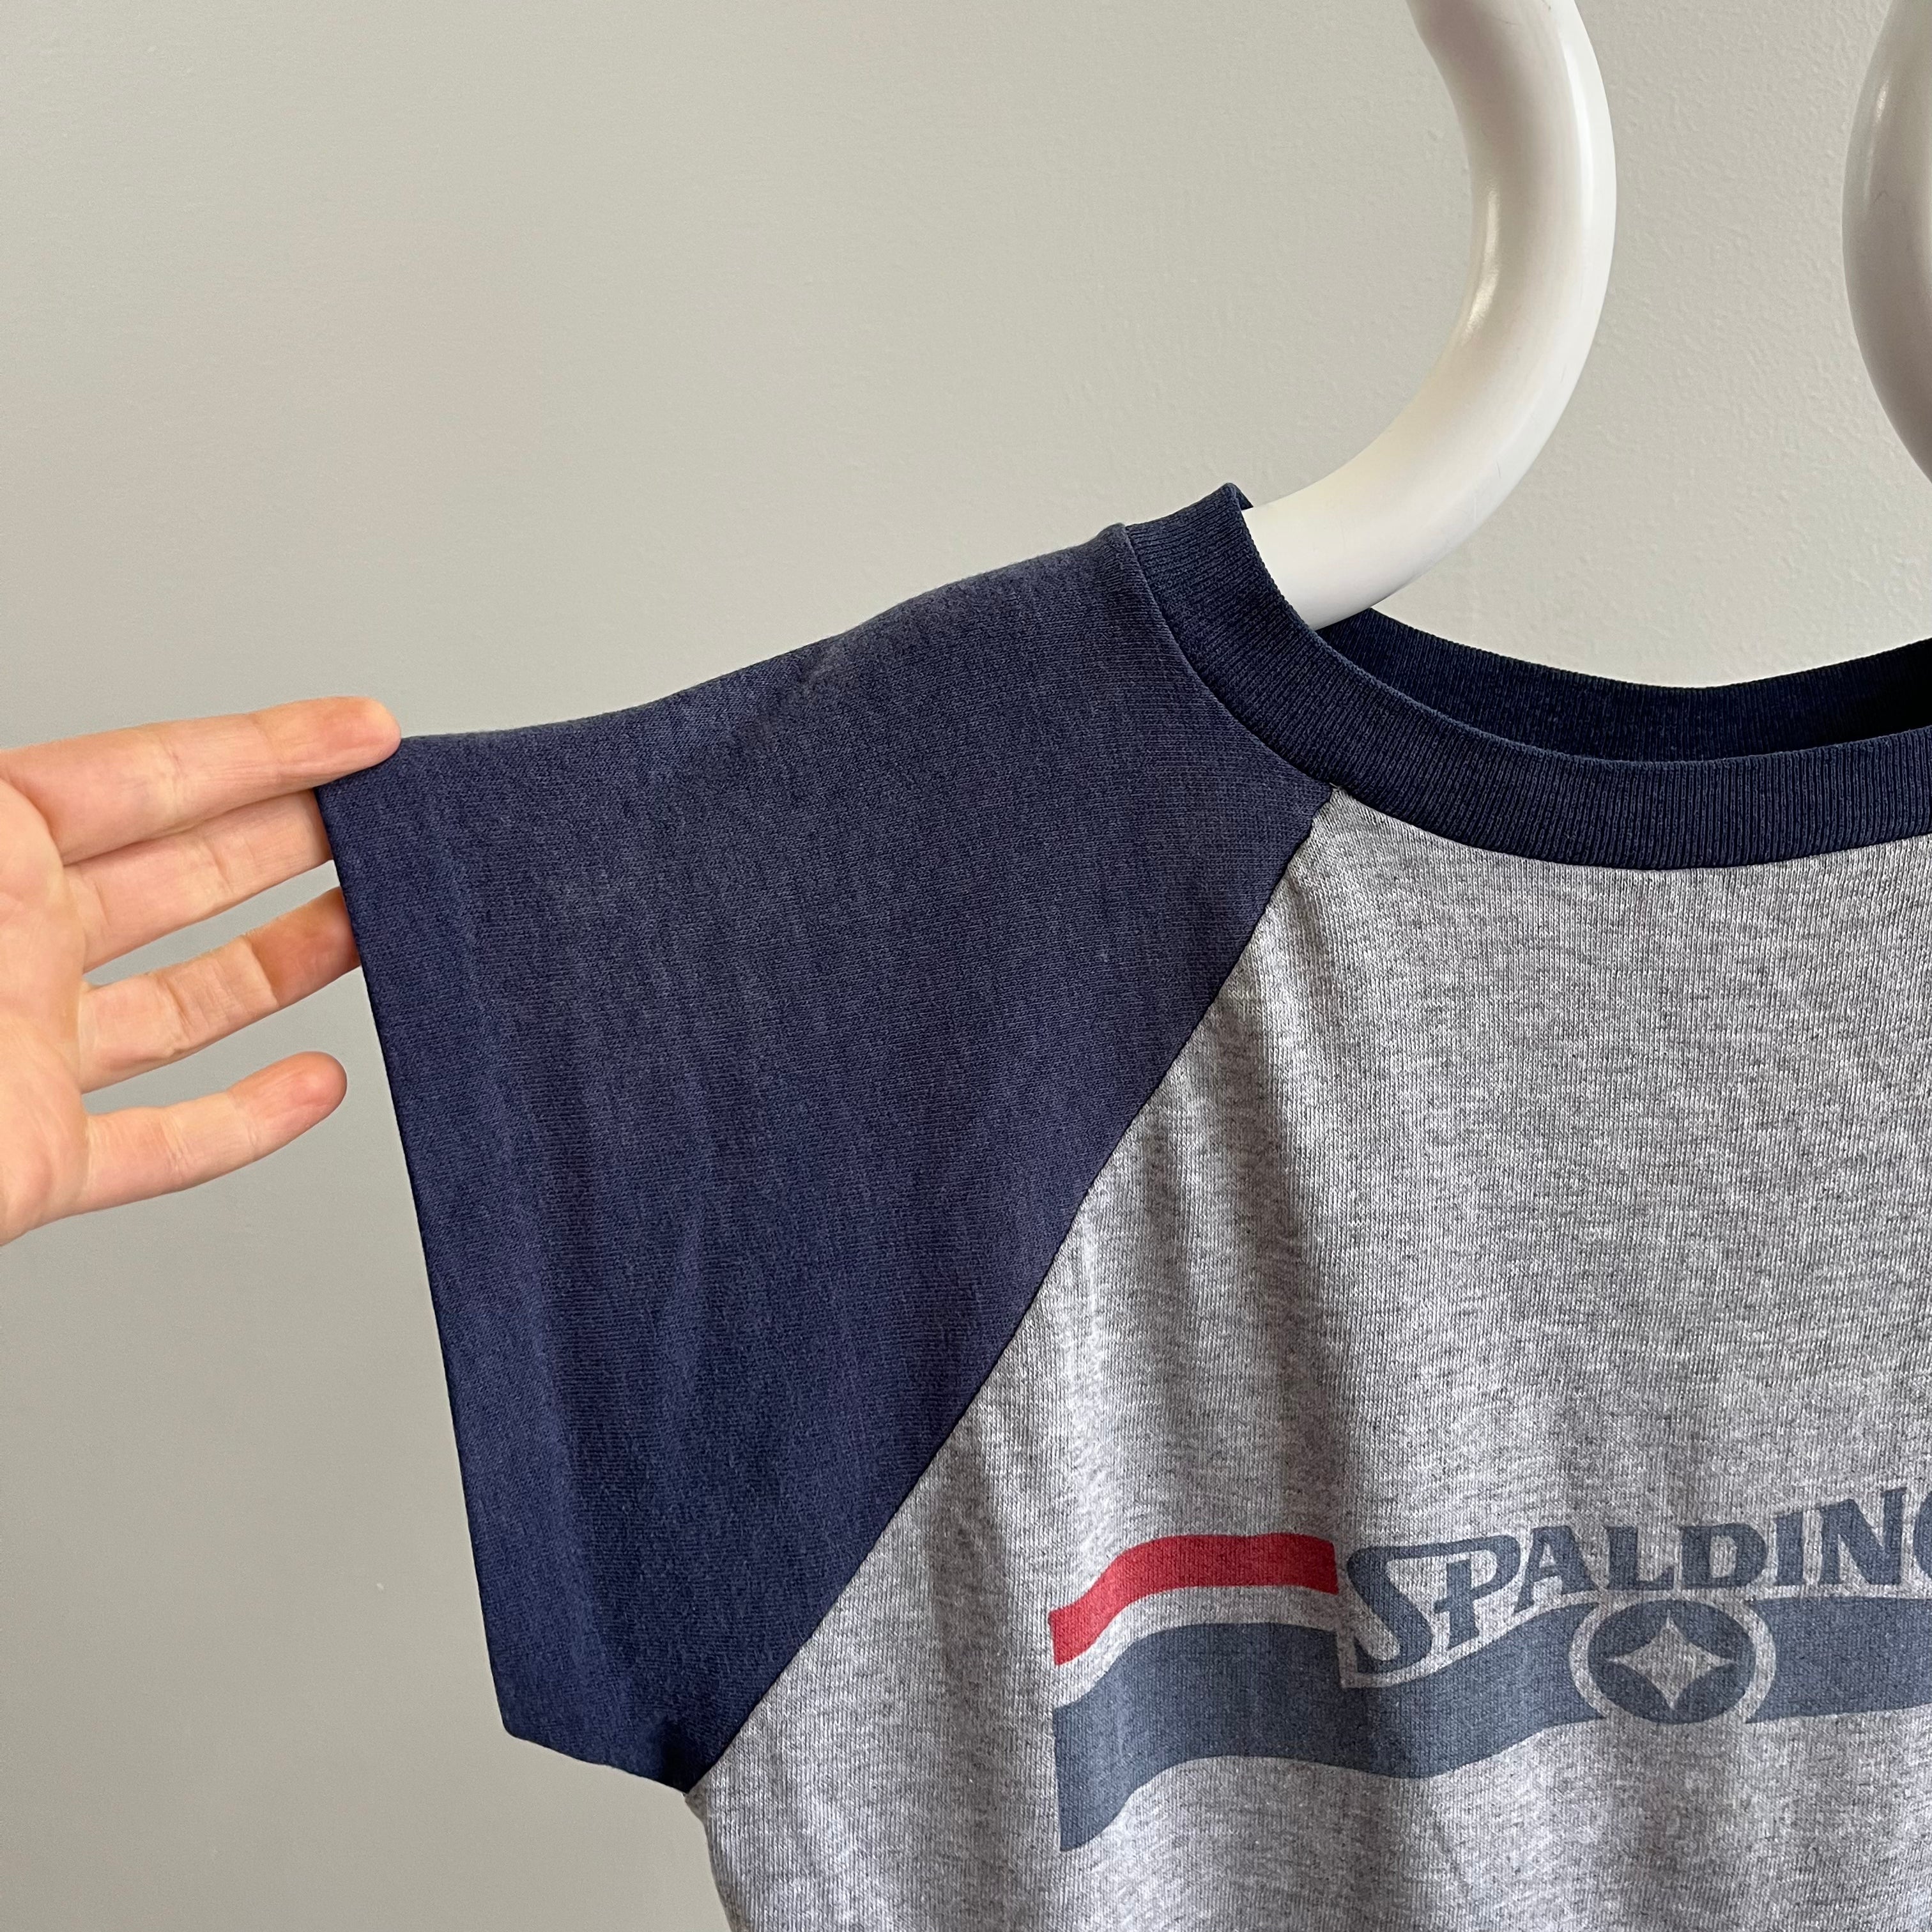 1980s Spaulding Short Sleeve T-Shirt Style Muscle Warm Up